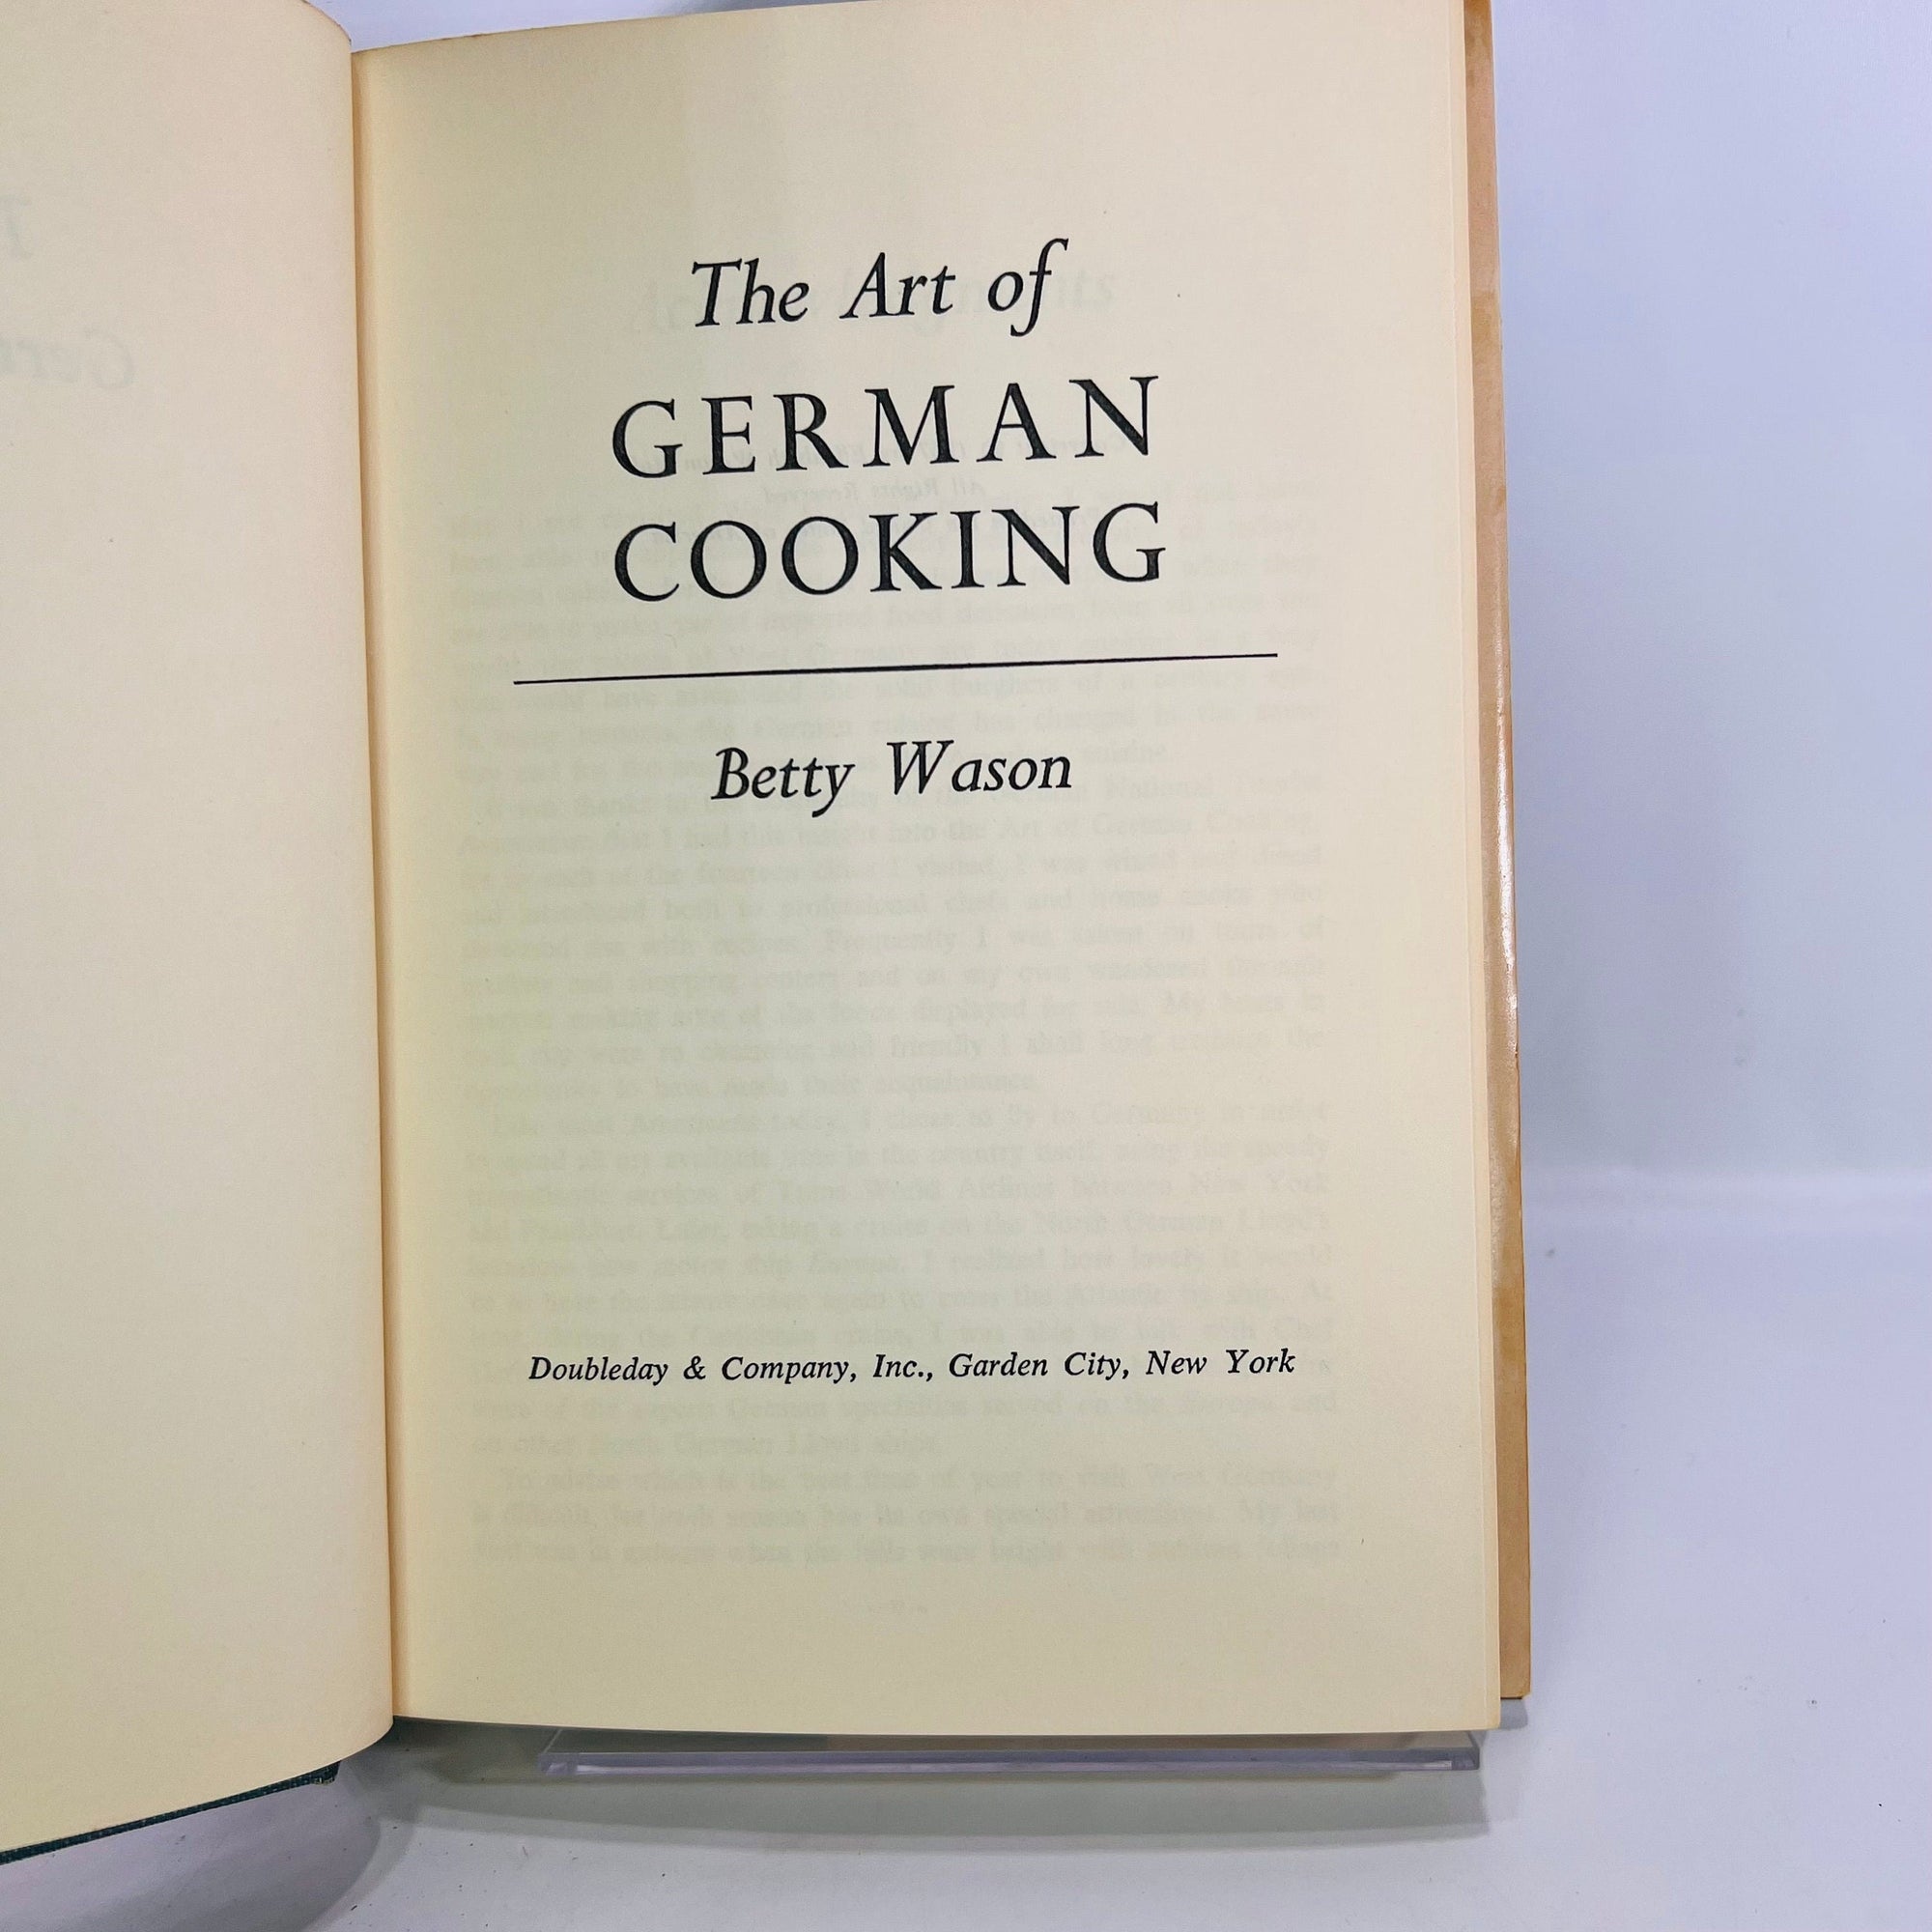 The Art of German Cooking by Betty Wason 1967 Double Day Publishing Vintage Book